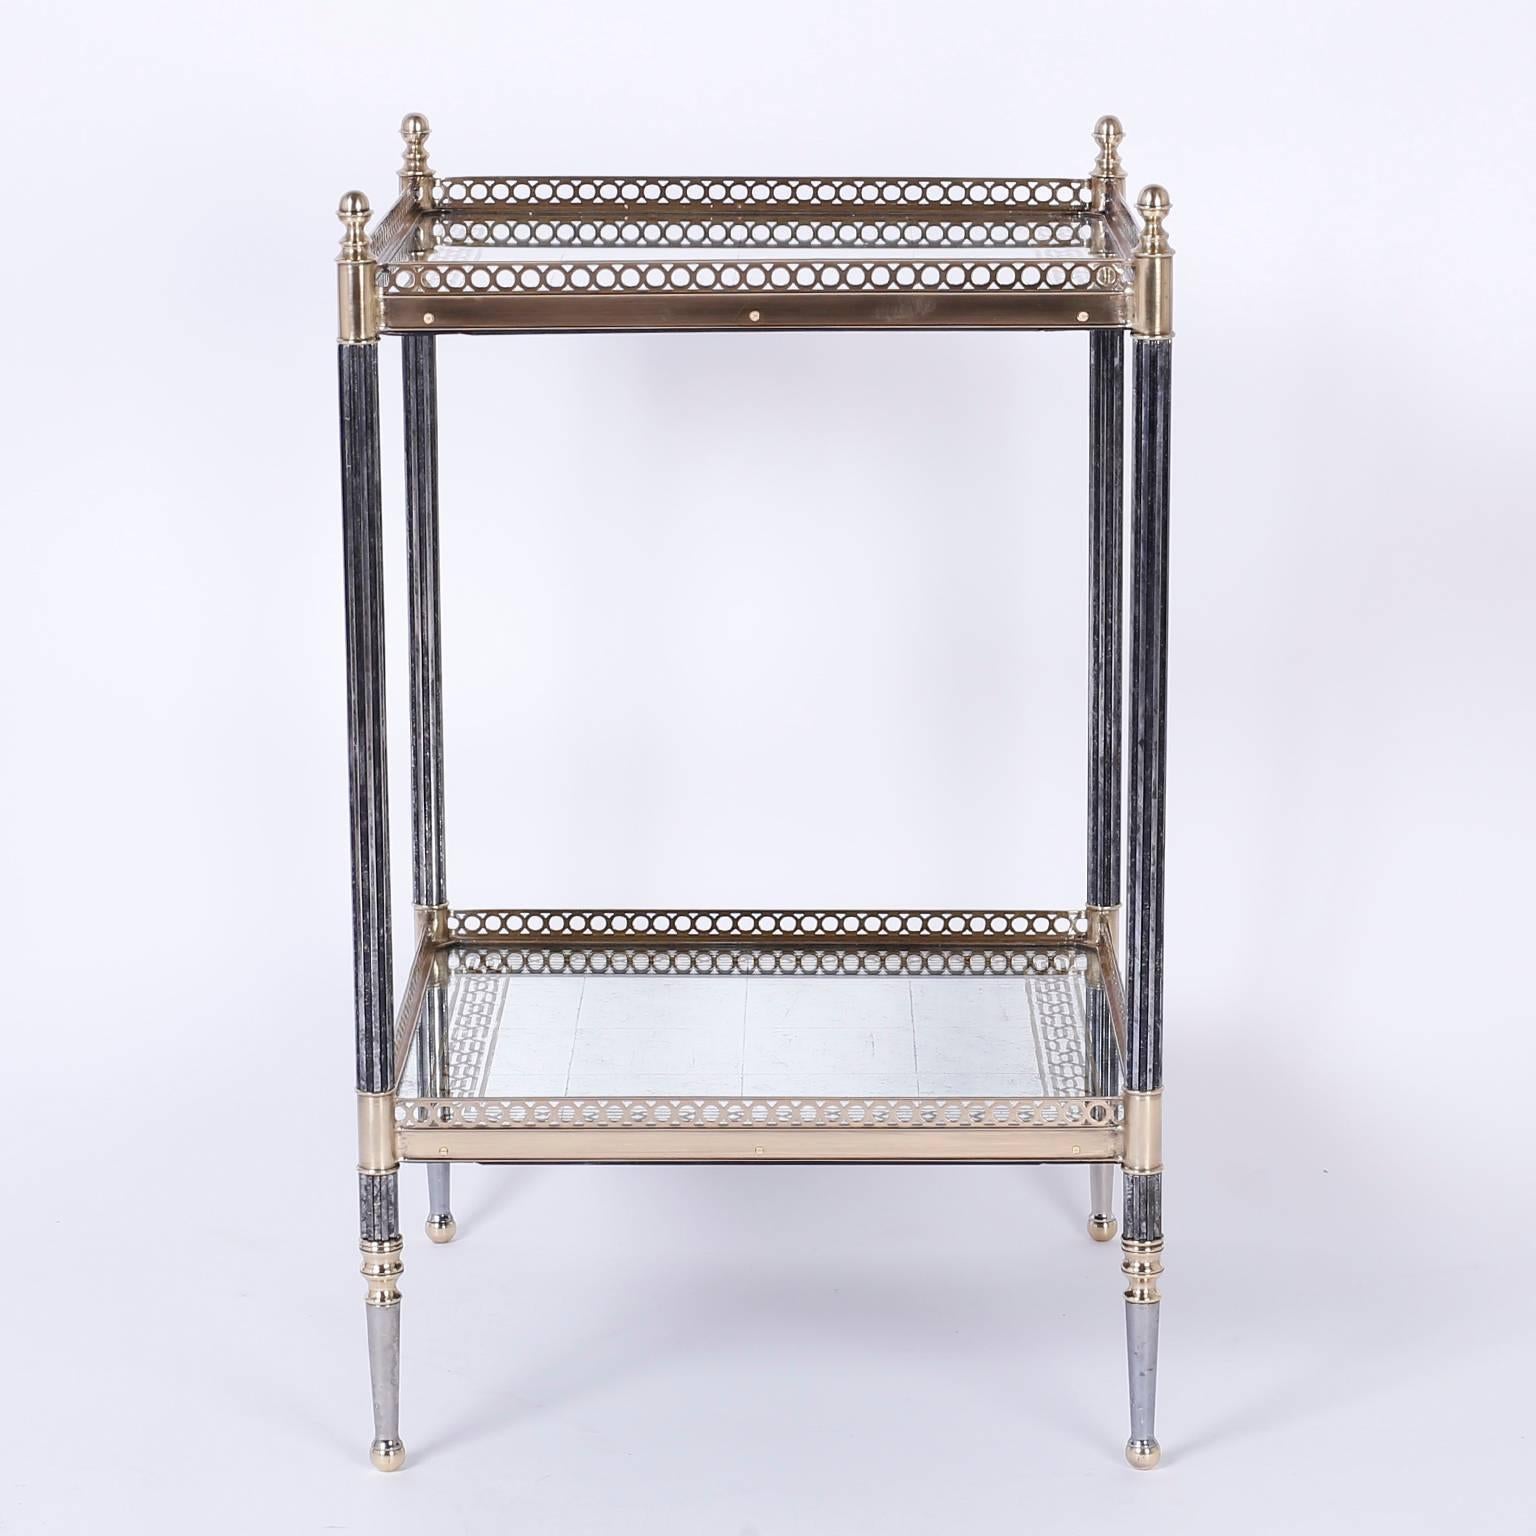 Two-tiered metal and glass table or stand with an elegant metal frame having finials at the top and ball feet. Each tier is silver and gold leaf under glass bordered by a brass gallery.